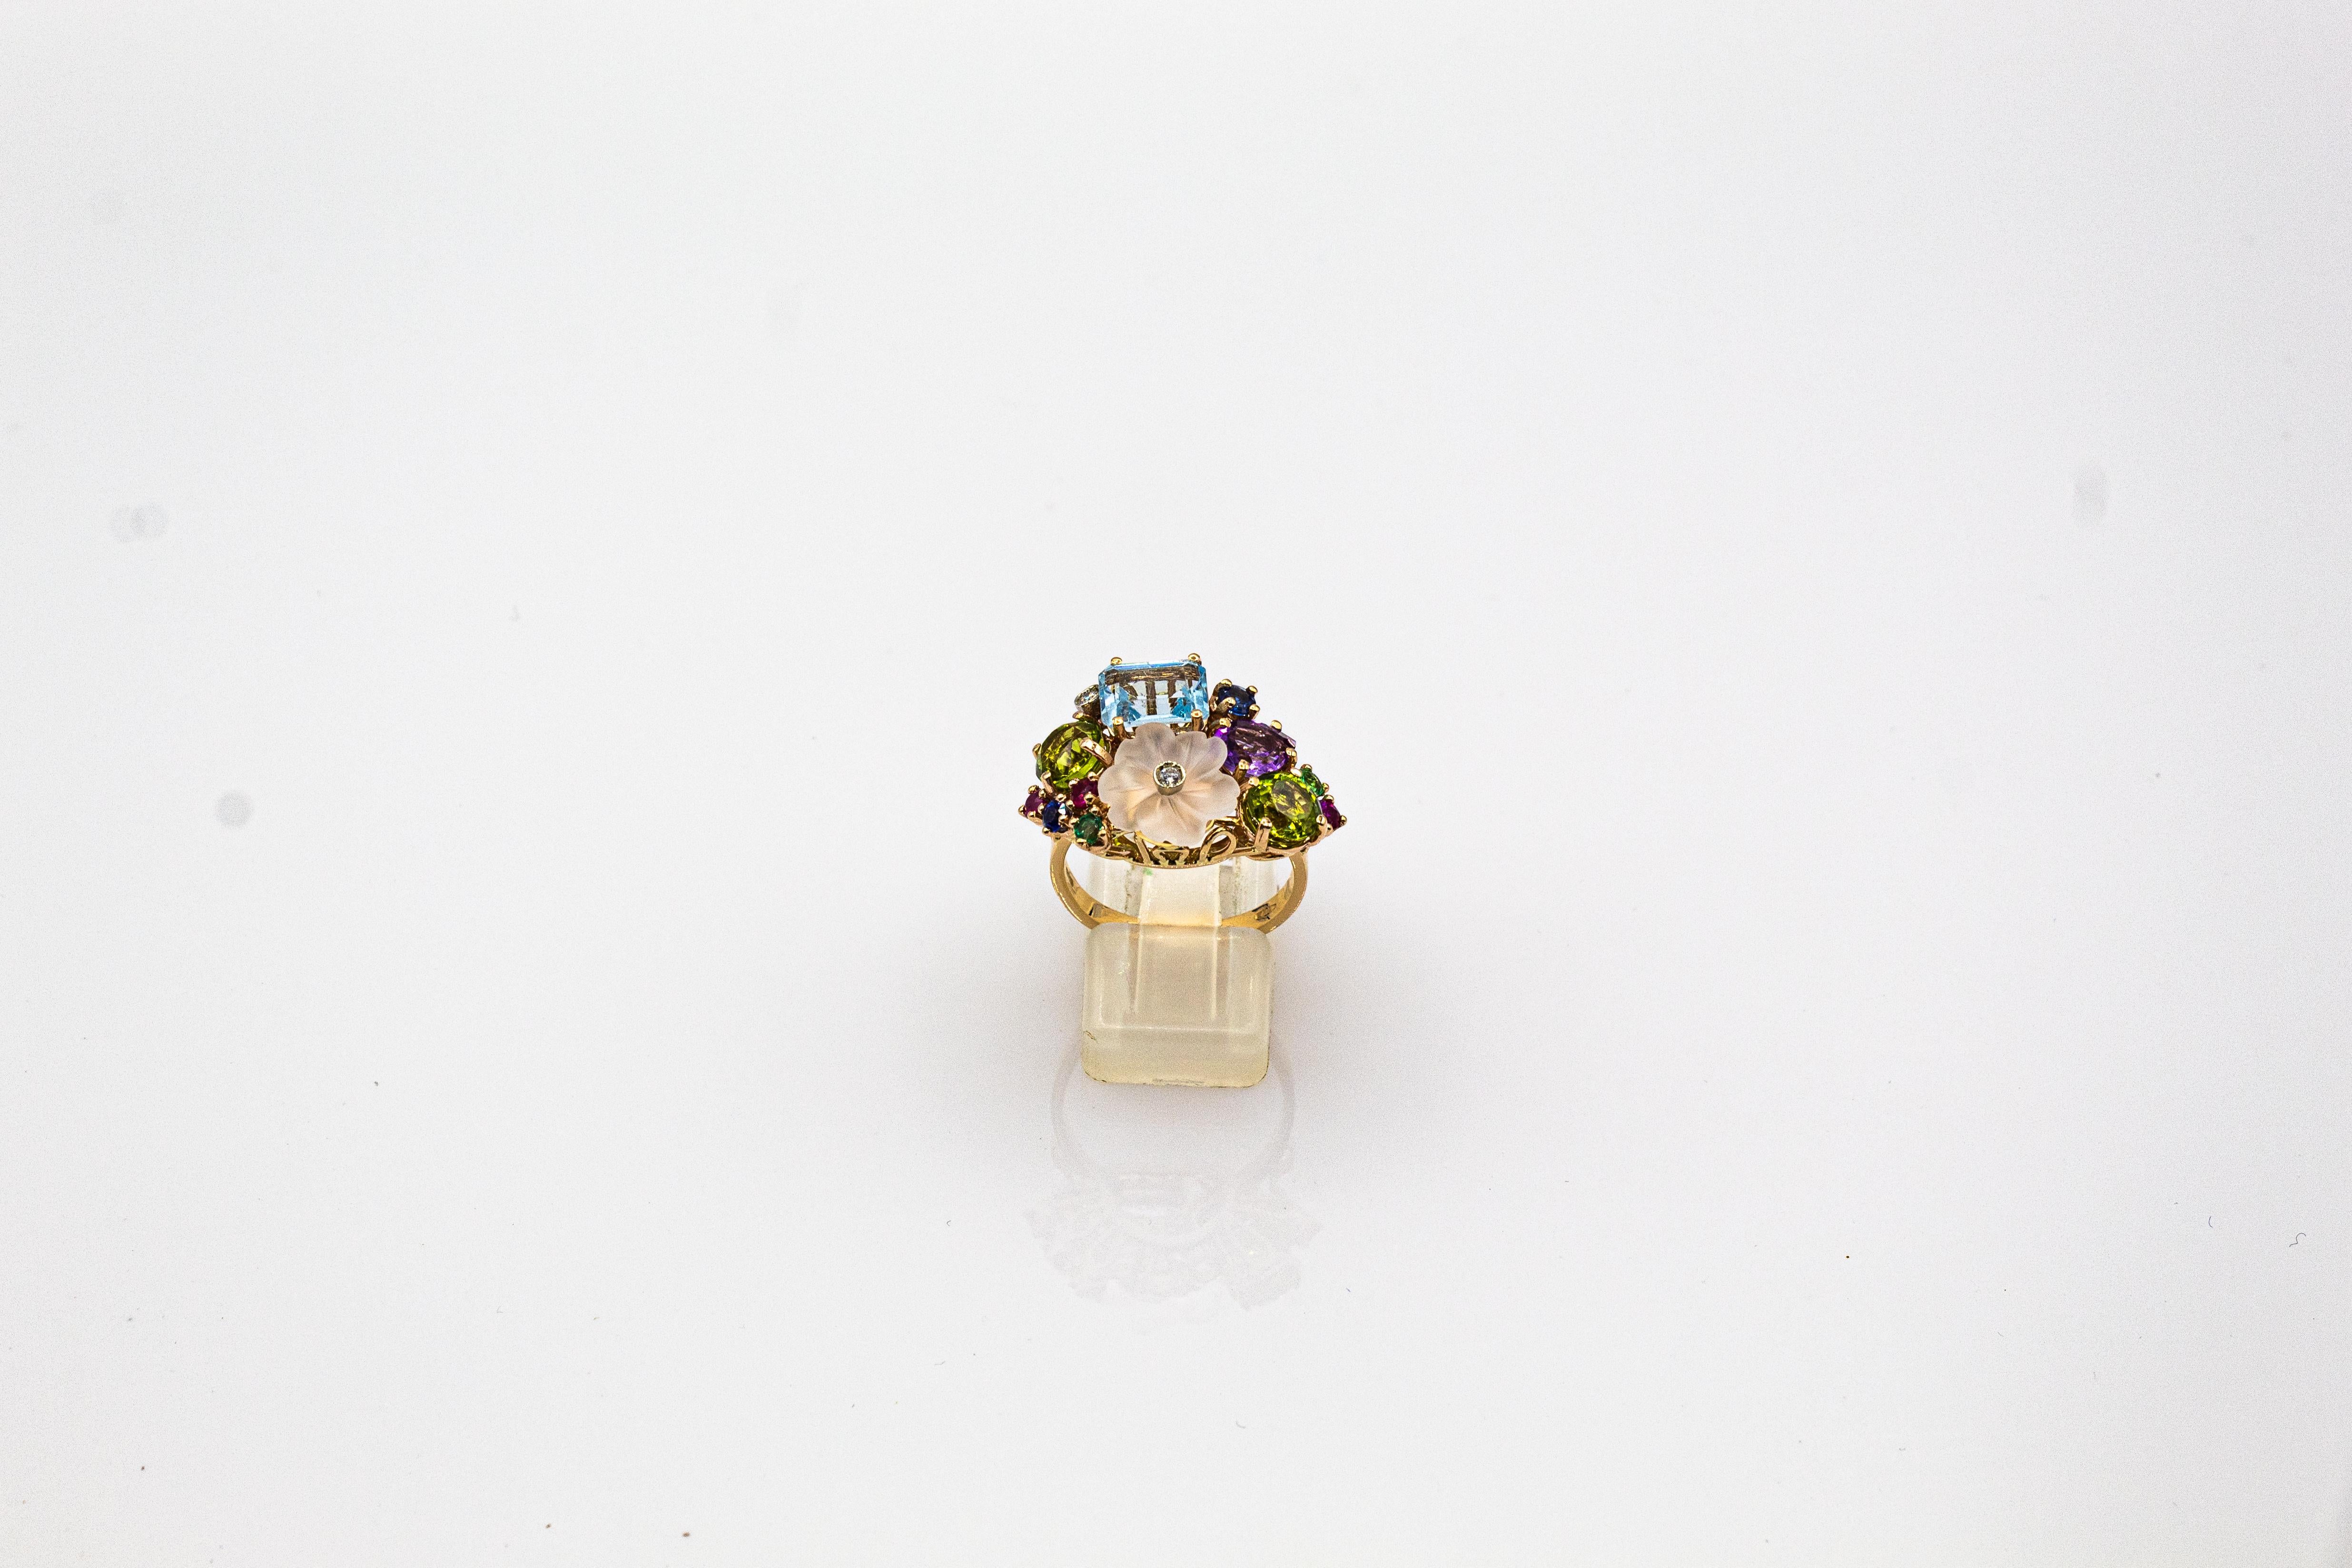 This Ring is made of 14K Yellow Gold.
This Ring has 0.04 Carats of White Brilliant Round Cut Diamonds.
This Ring has 0.20 Carats of Rubies.
This Ring has 0.08 Carats of Emeralds.
This Ring has 0.12 Carats of Blue Sapphires.
This Ring has also Rock